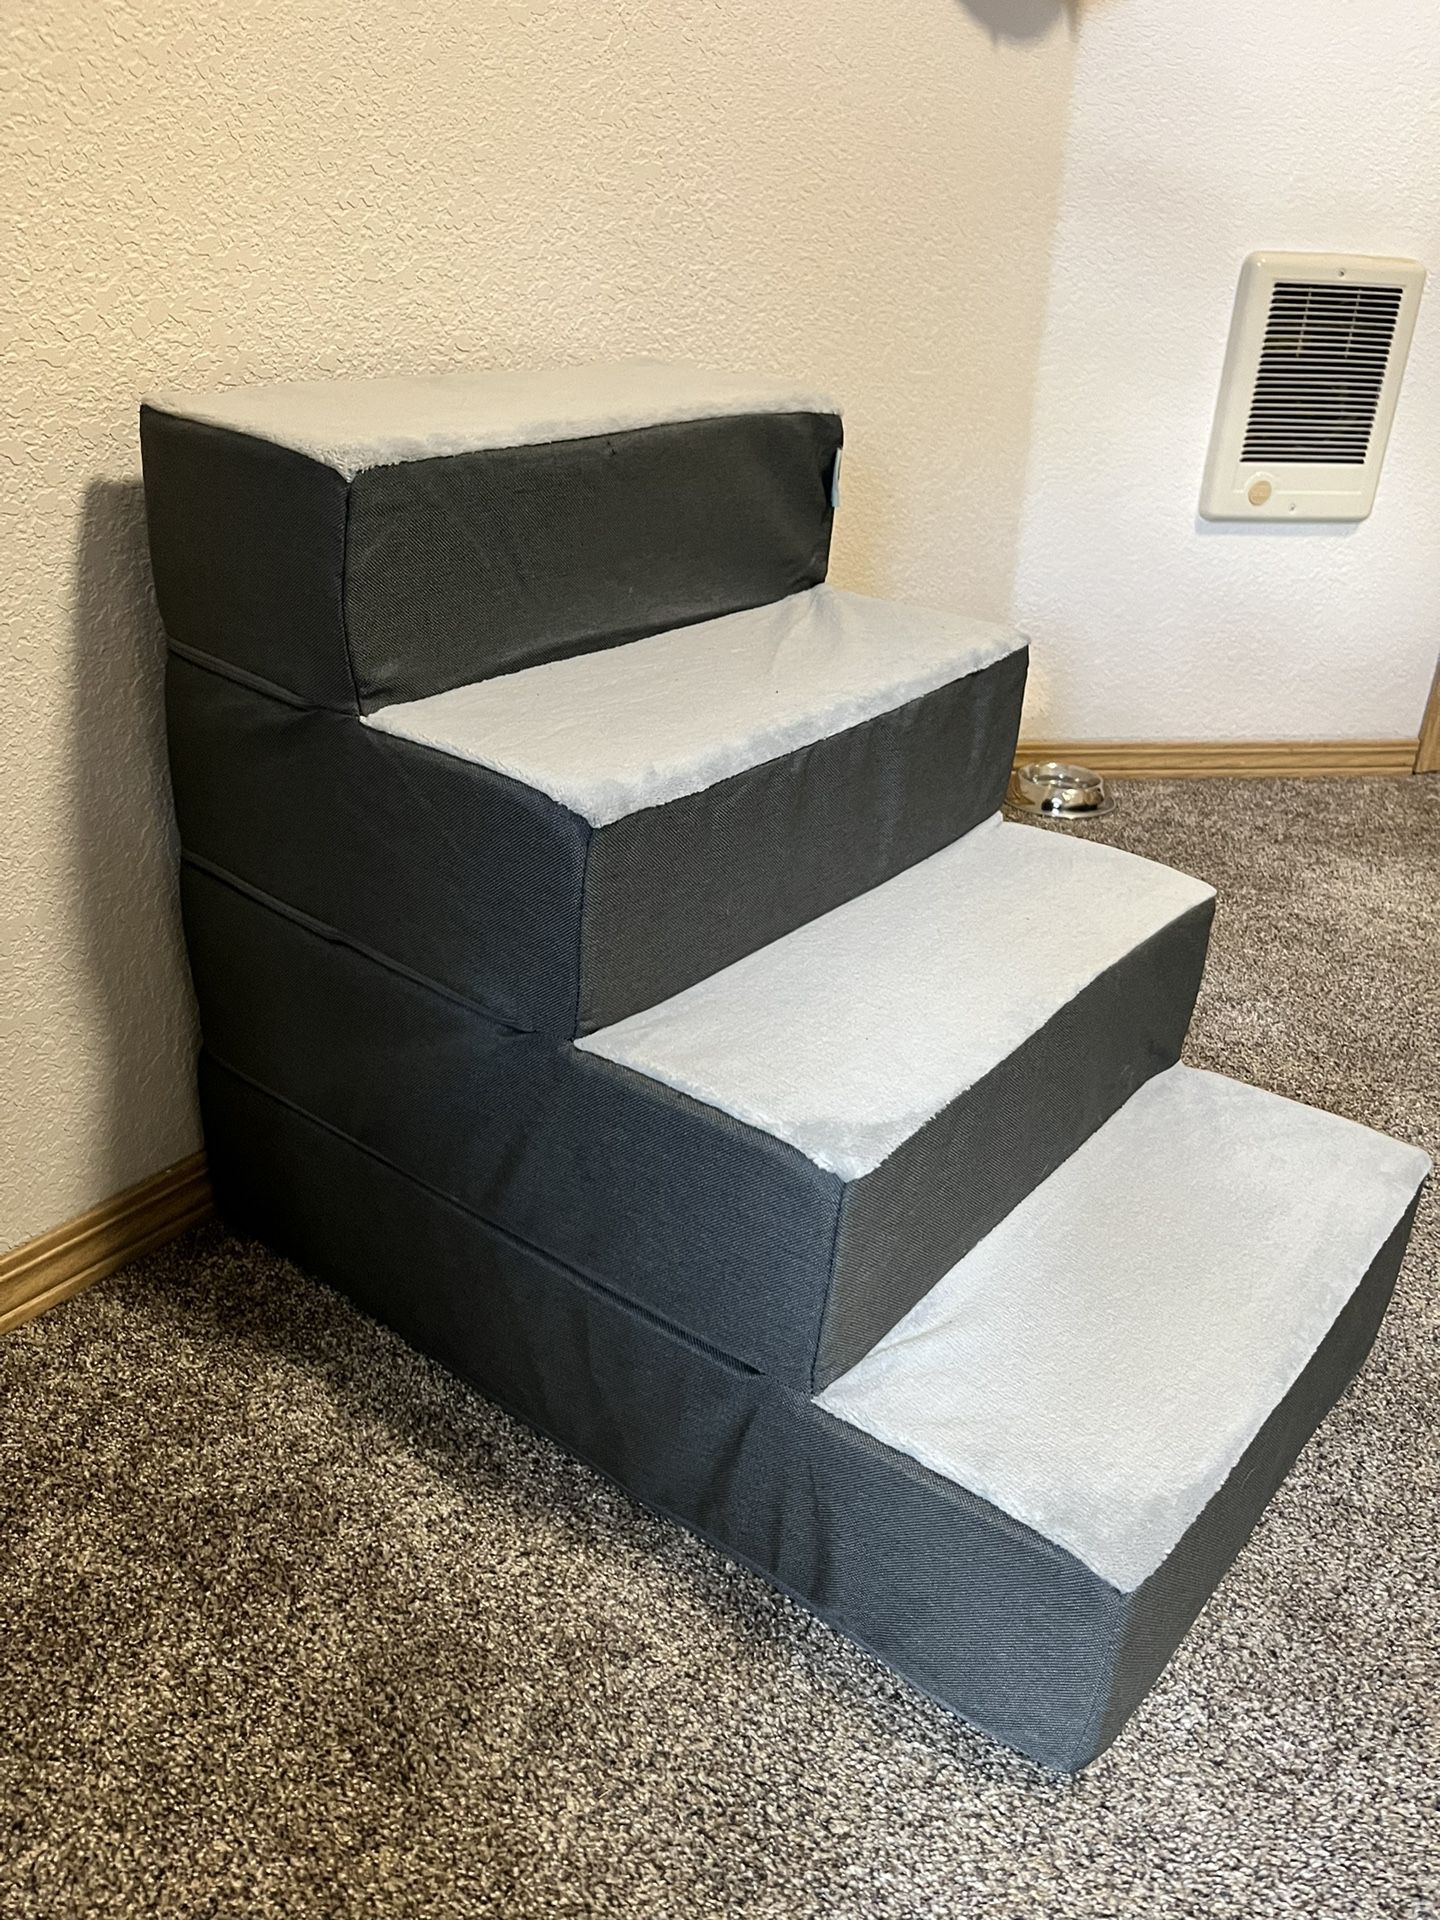 Pet Stairs for Bed or Couch